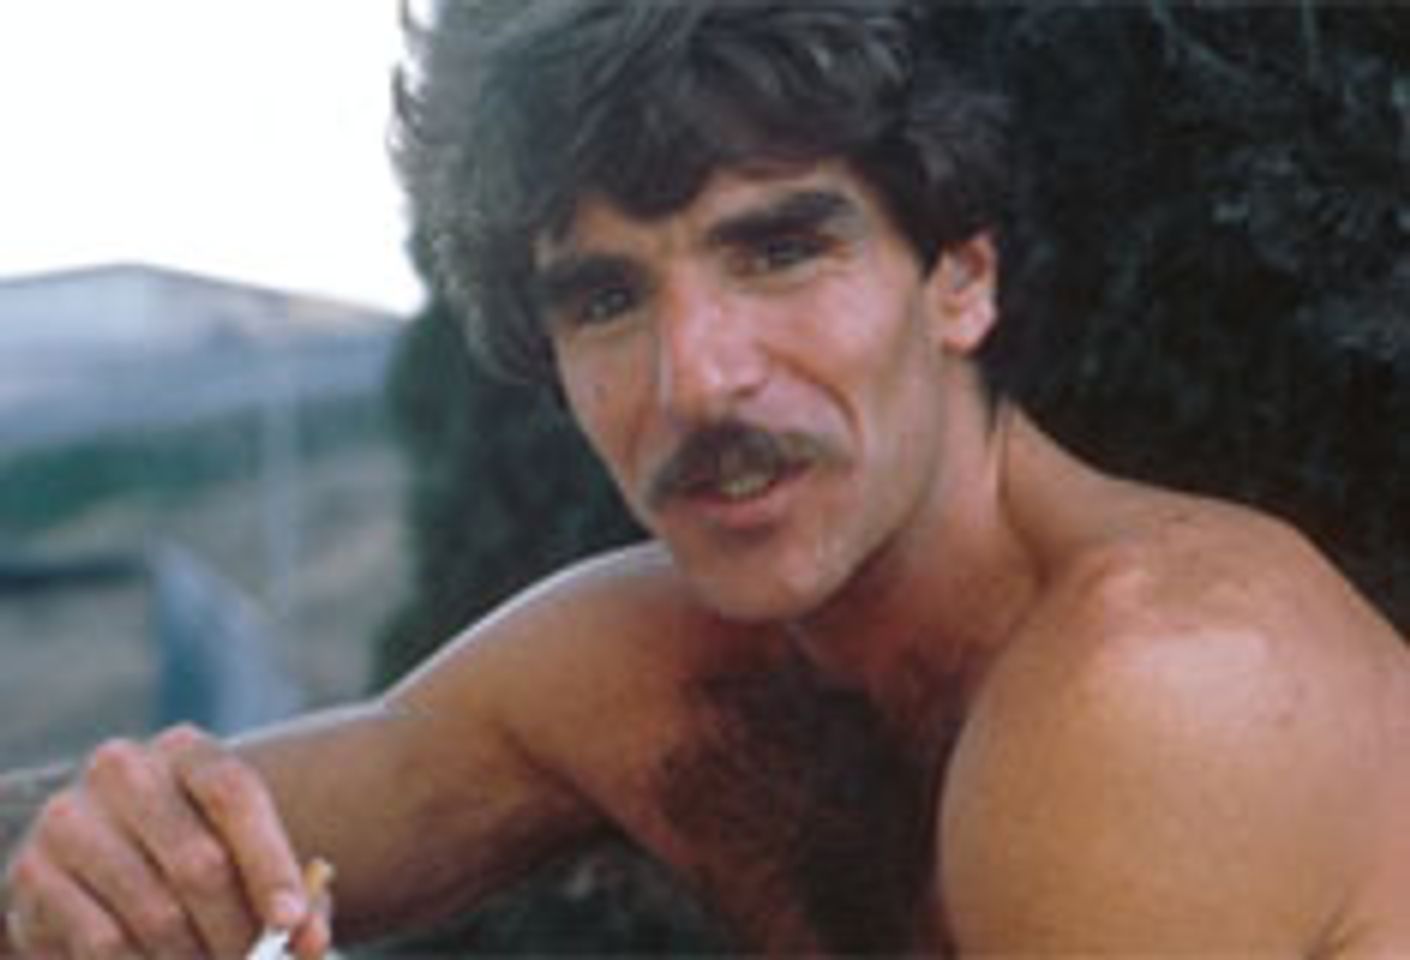 Harry Reems Gay Porn - Ex-Porn Star Harry Reems Opens Up in Exclusive Interview | AVN